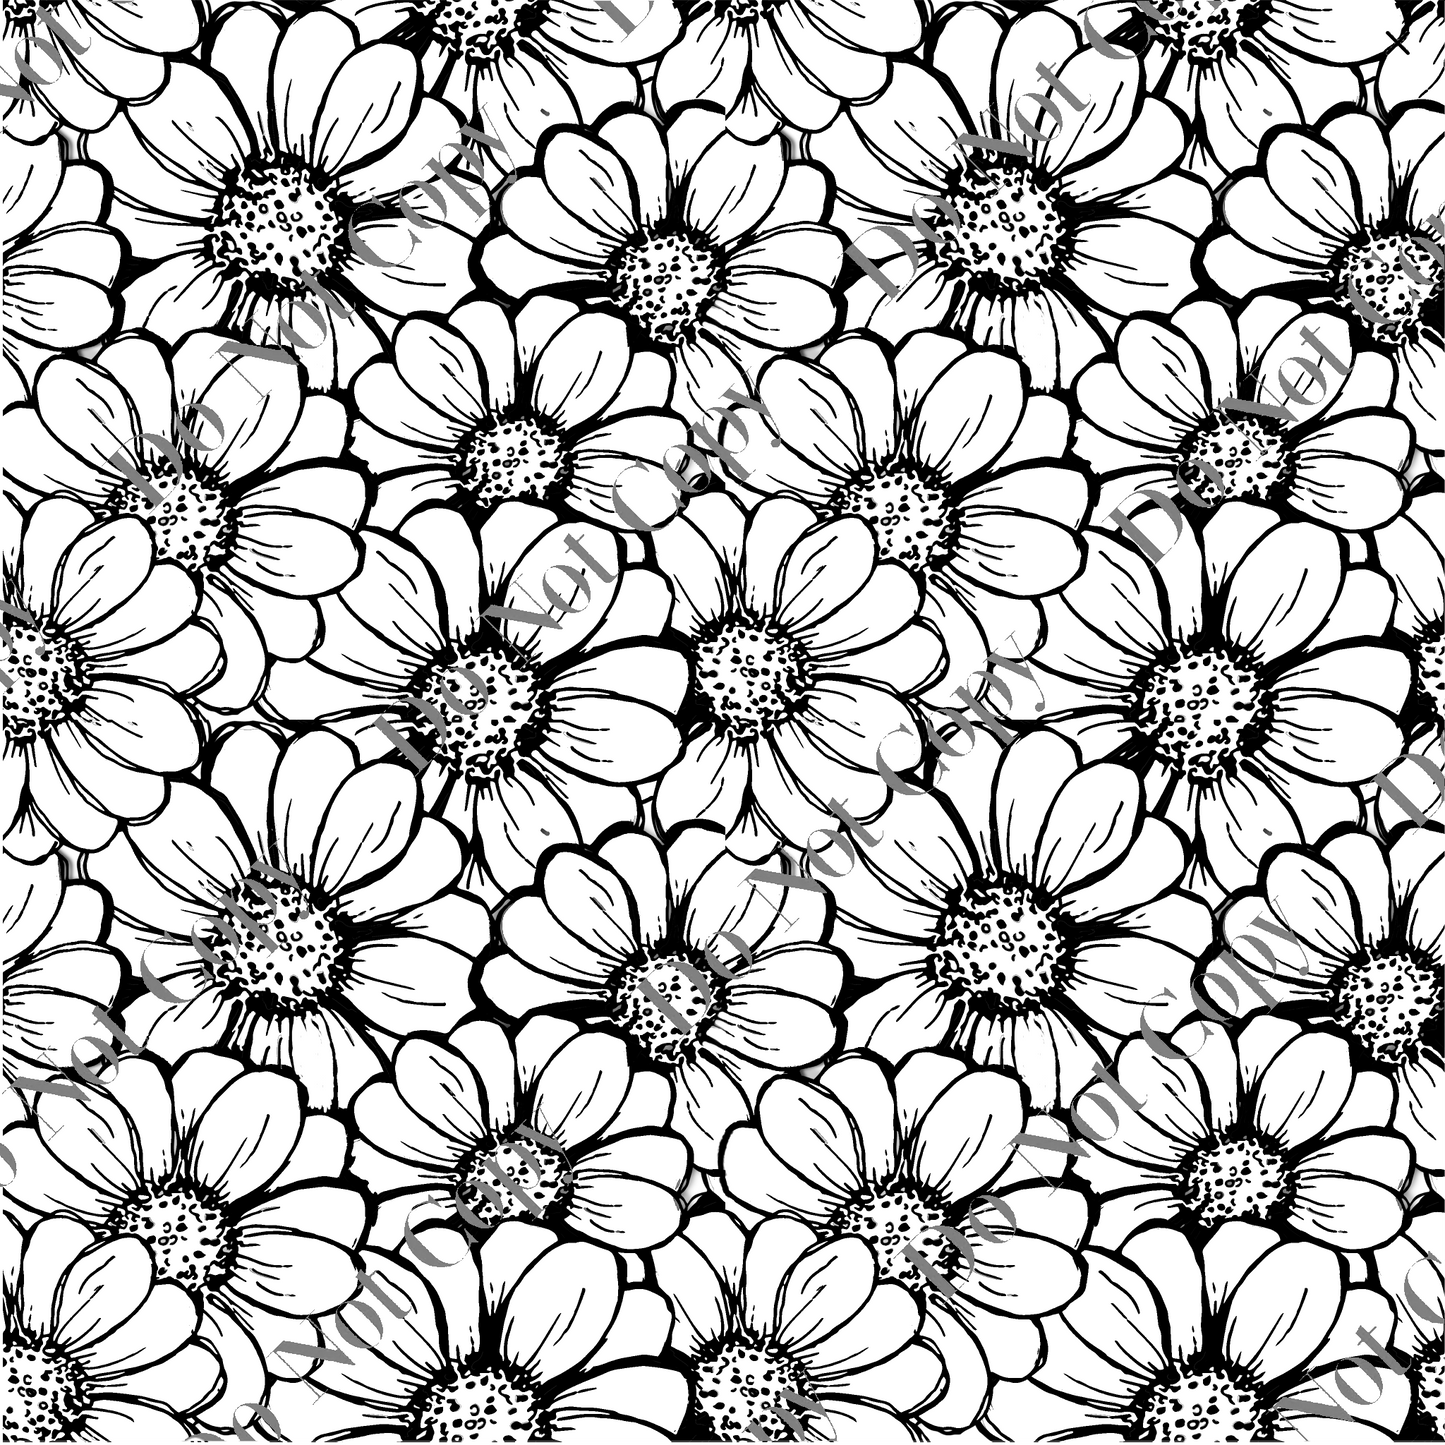 Patterned Vinyl - Daisy line Drawing